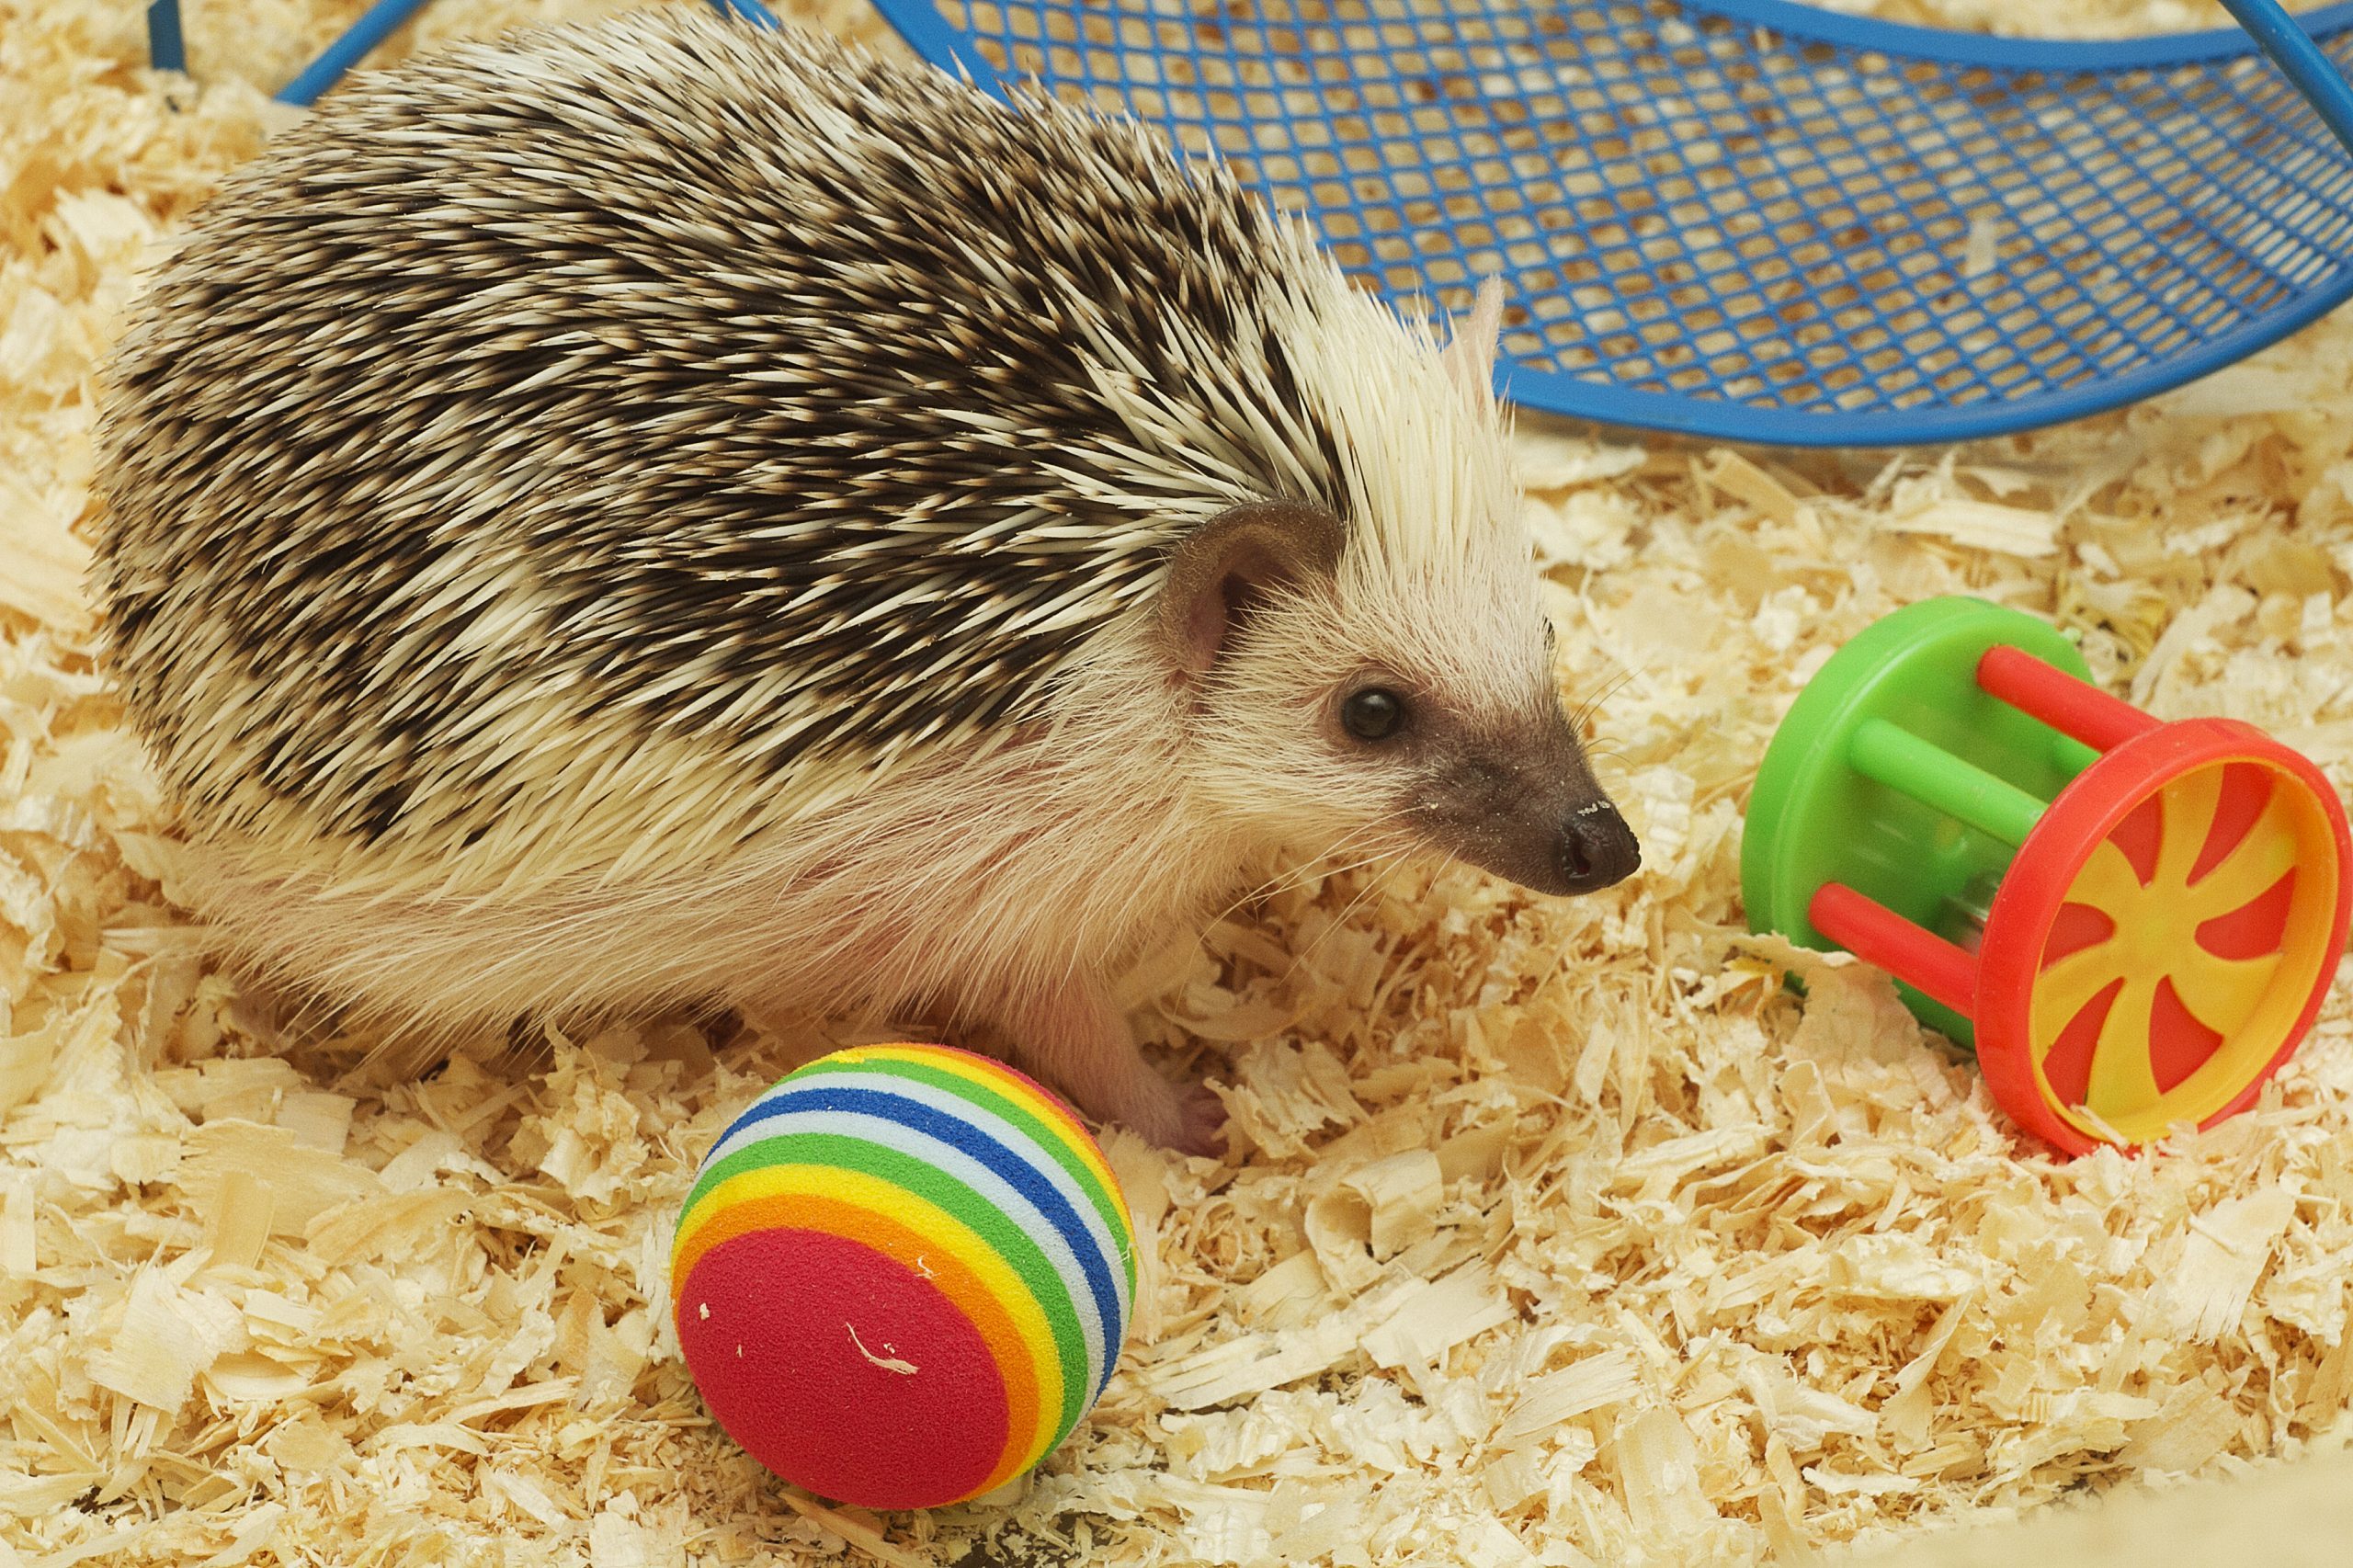 cute and fun hedgehog baby with breeding facility background